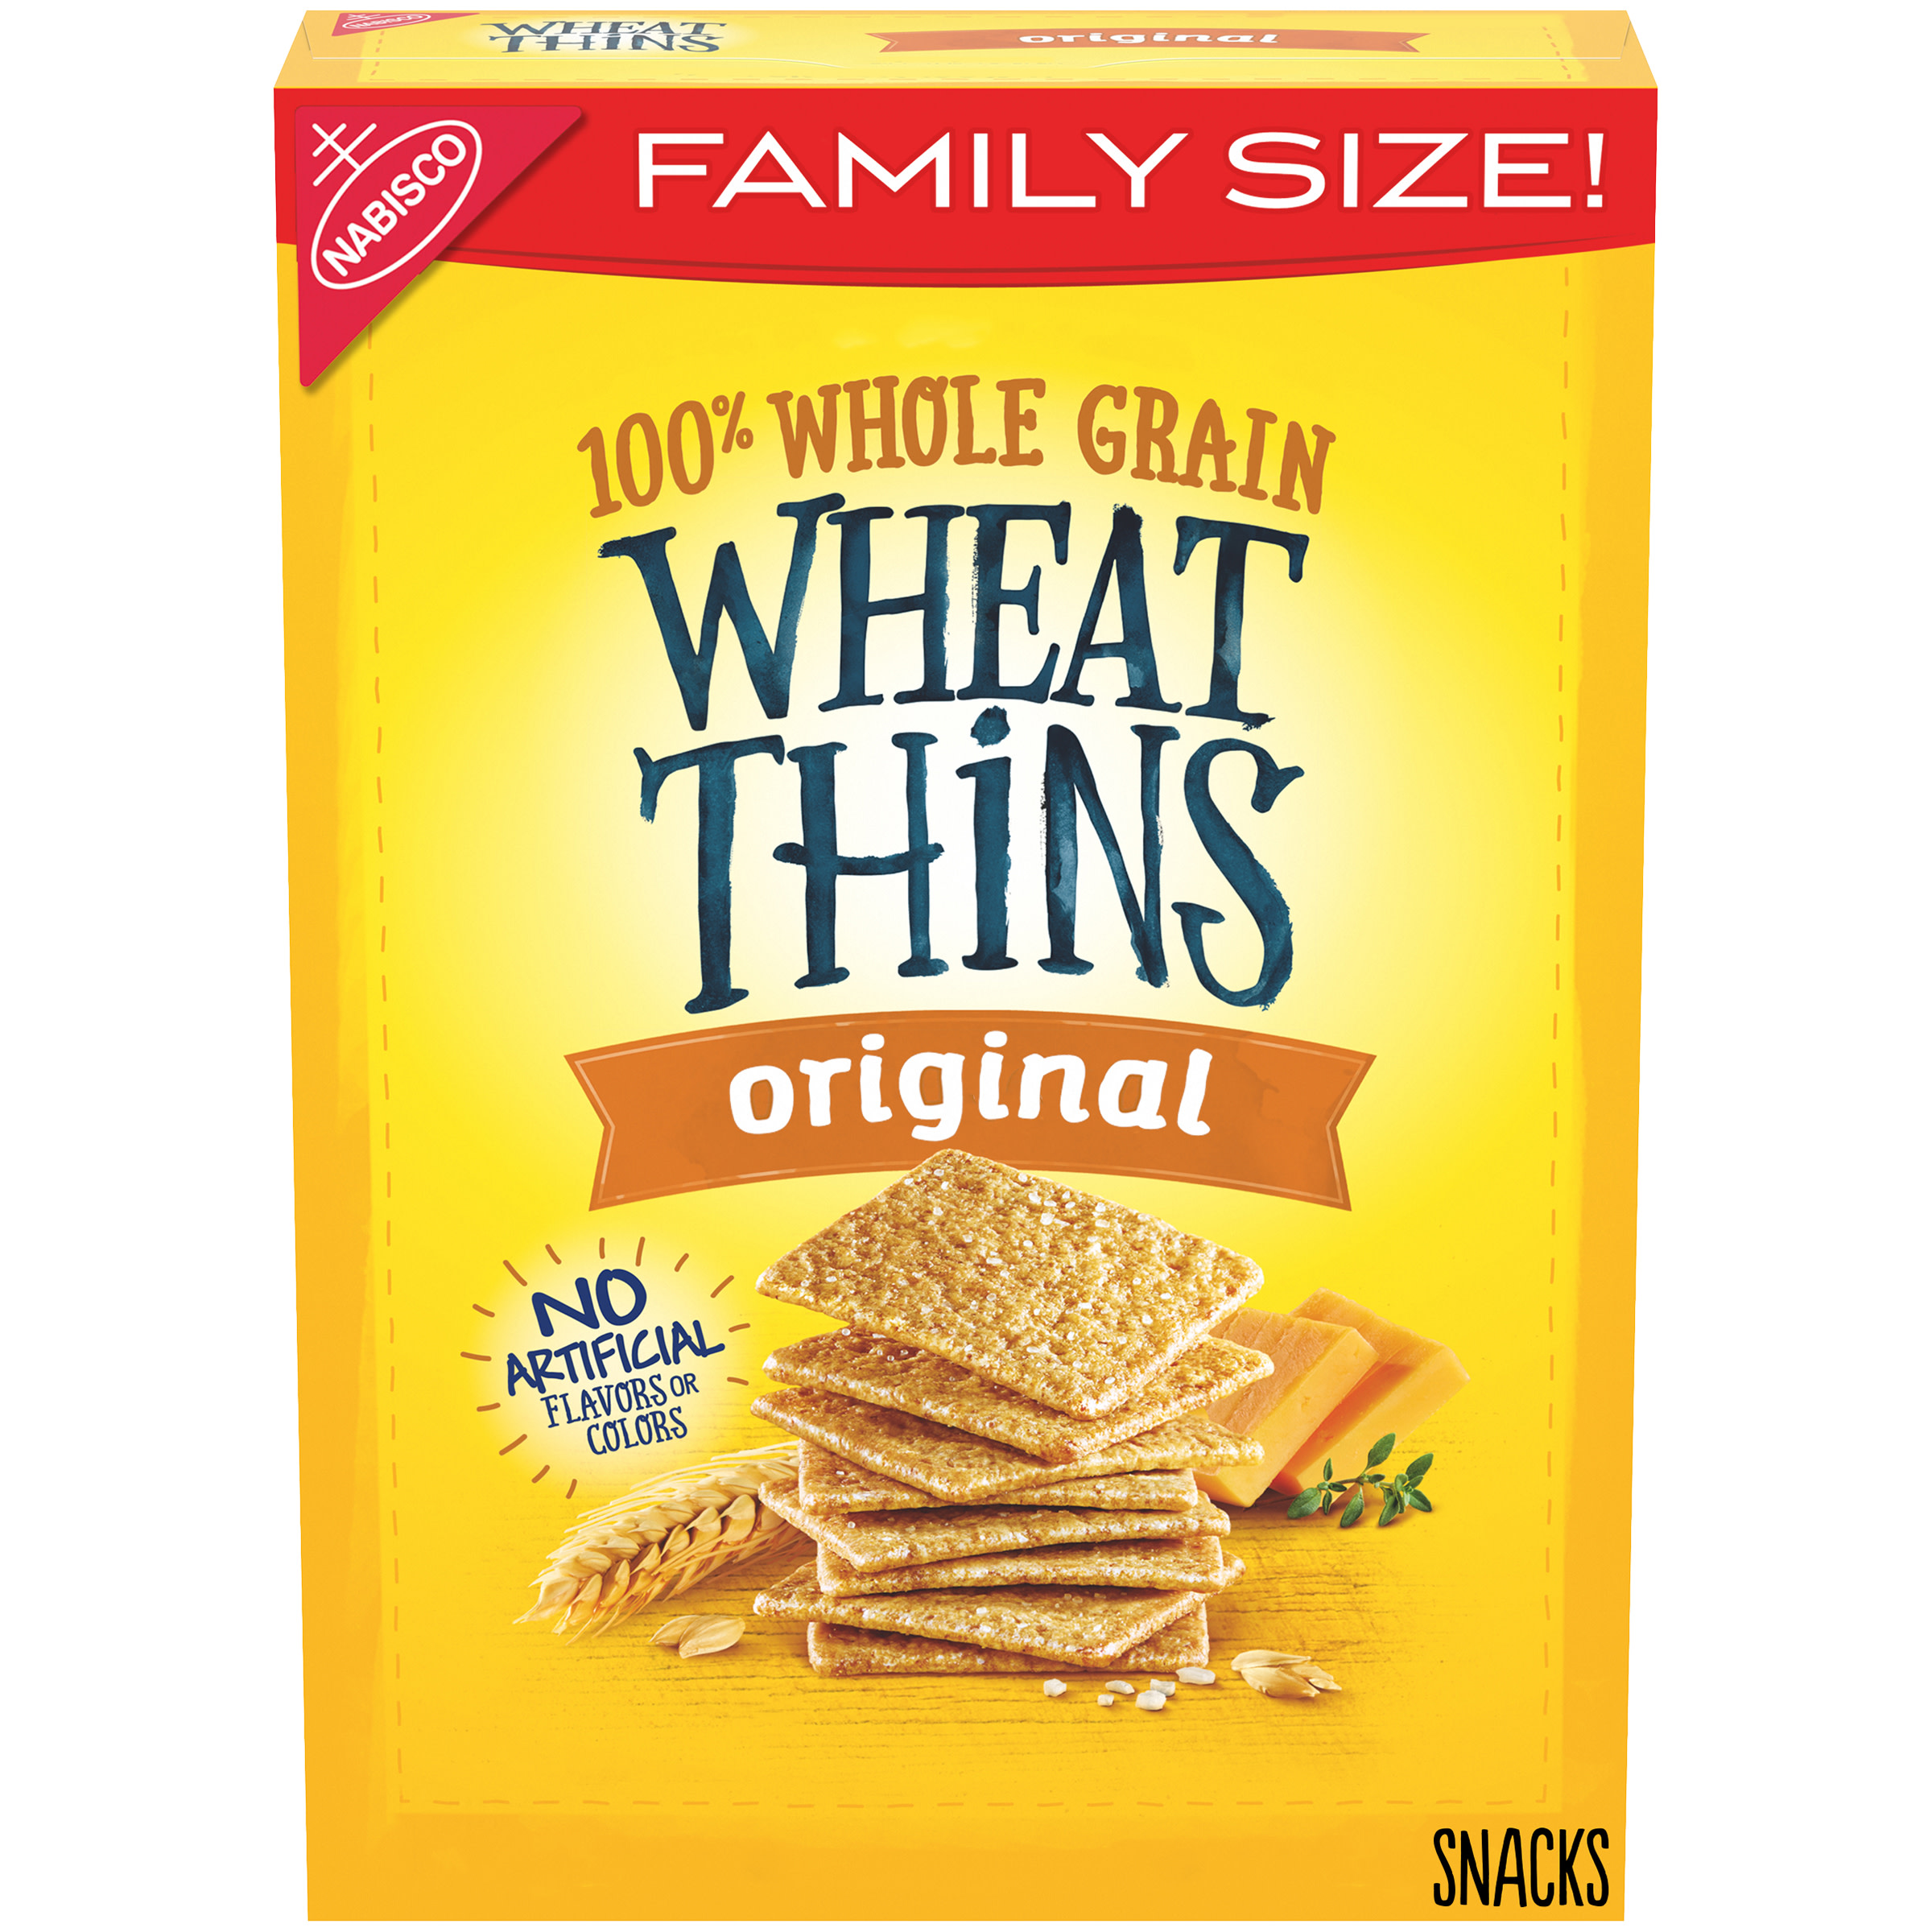 Wheat Thins Original Whole Grain Wheat Crackers, Family Size, 16 oz - image 1 of 16